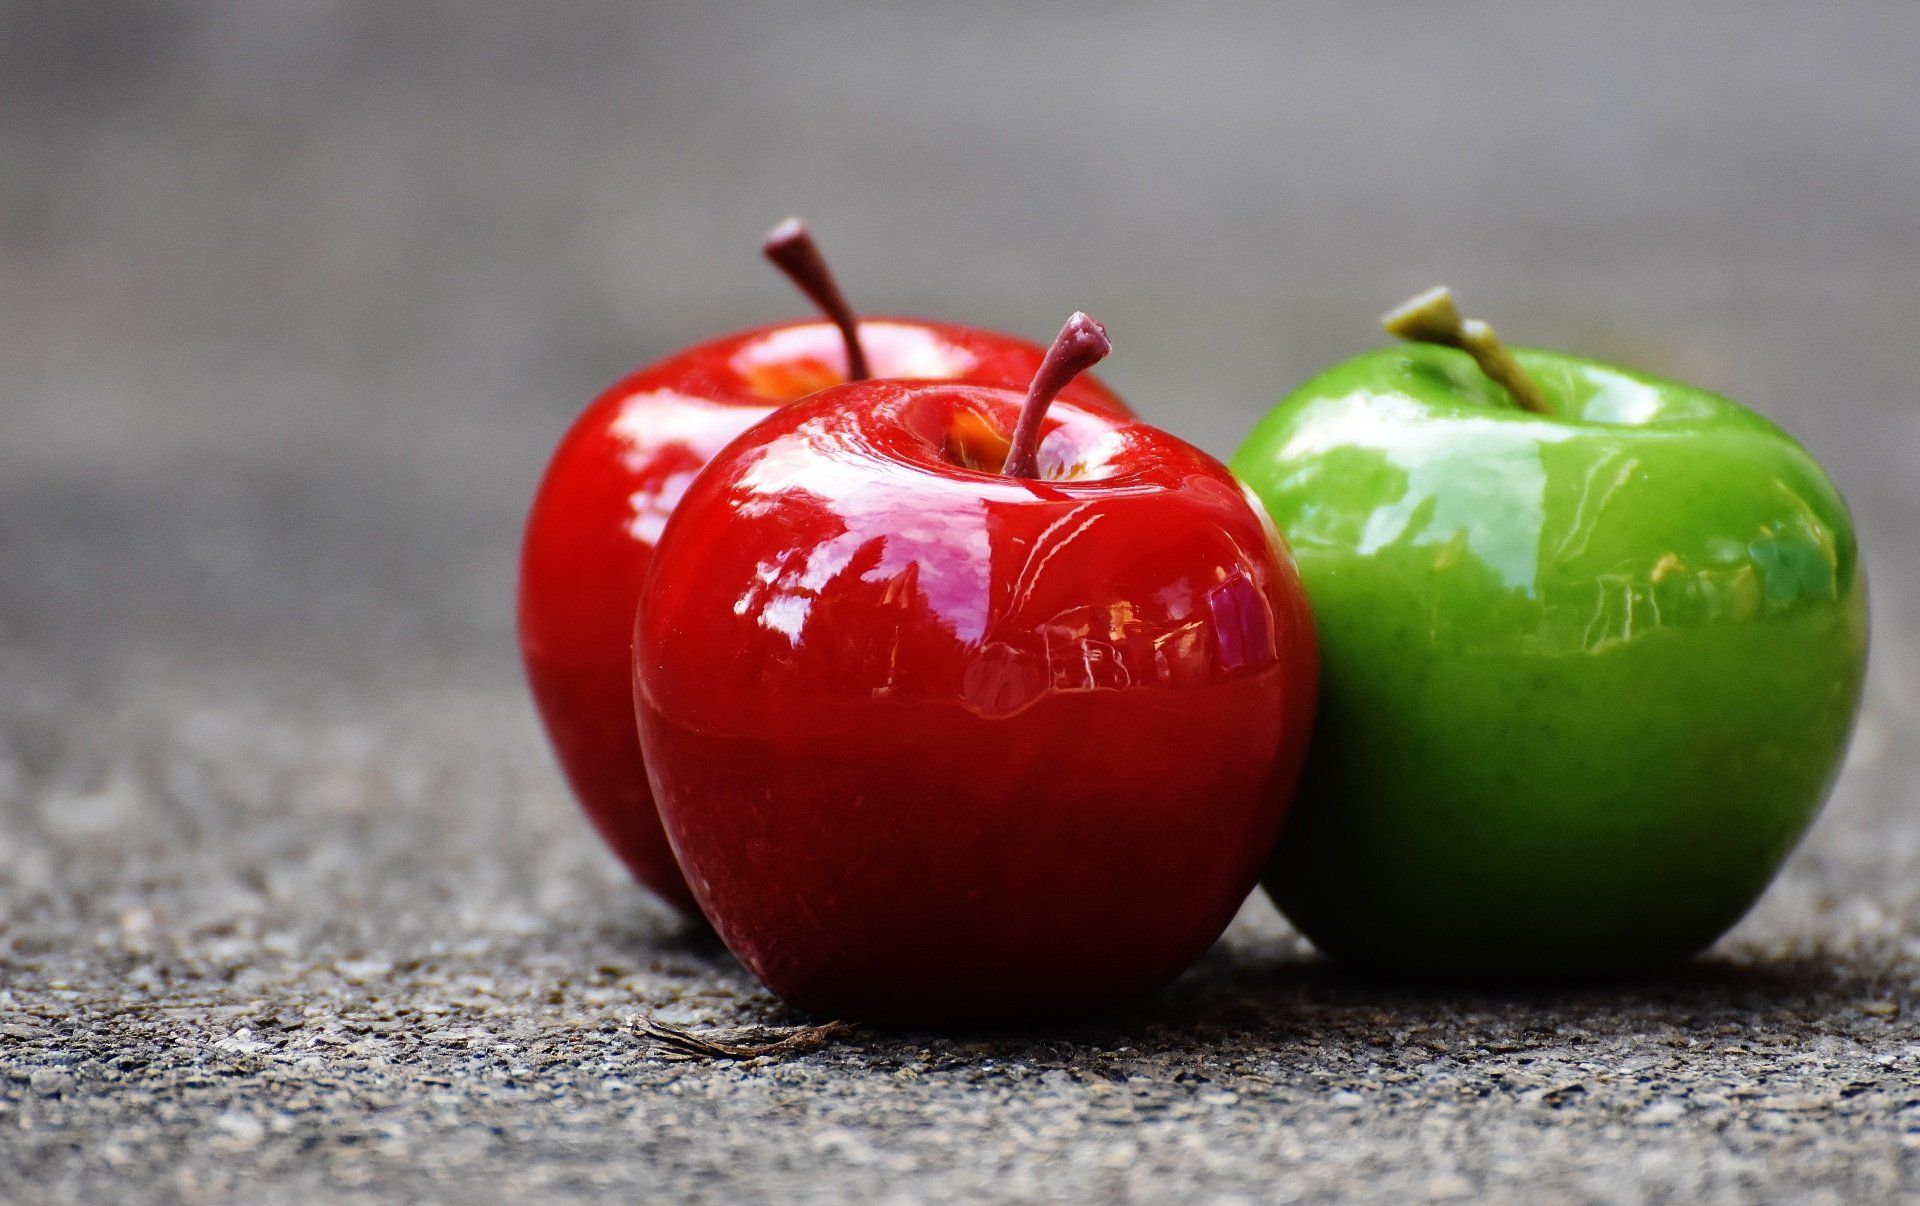 red apples and green apples on flat surface